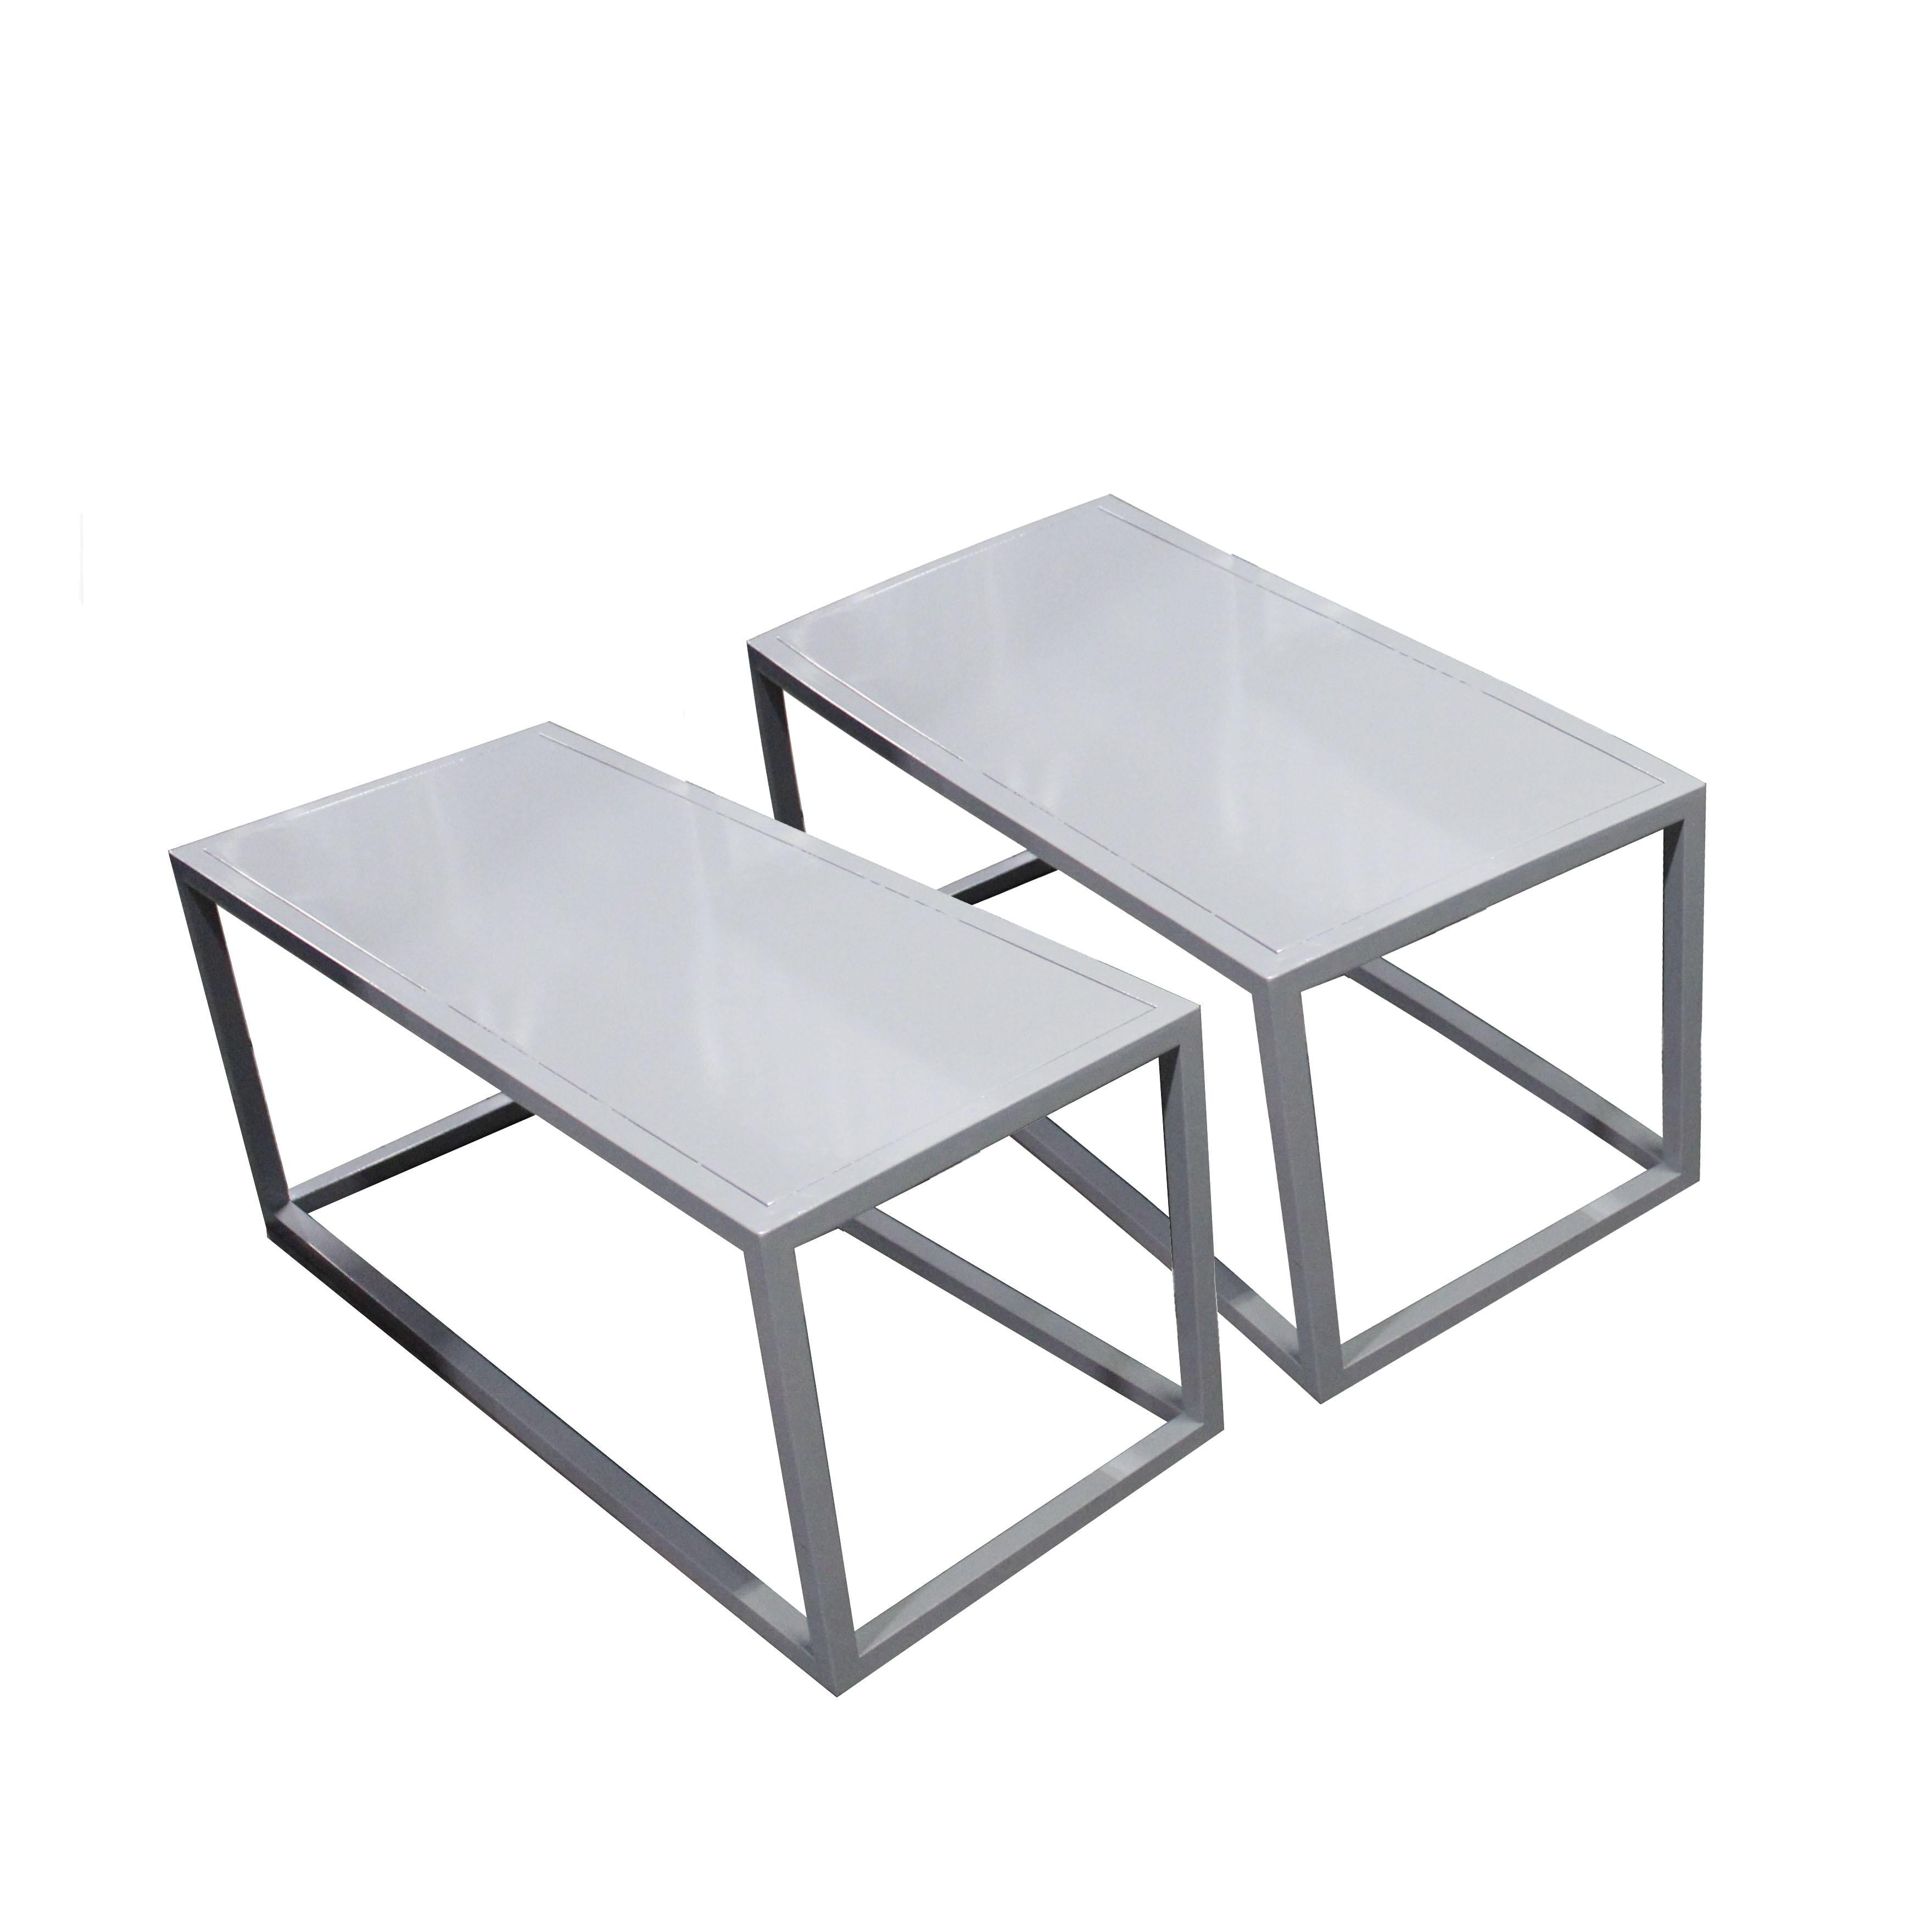 North American Minimalist Metal Judd Style Benched For Sale